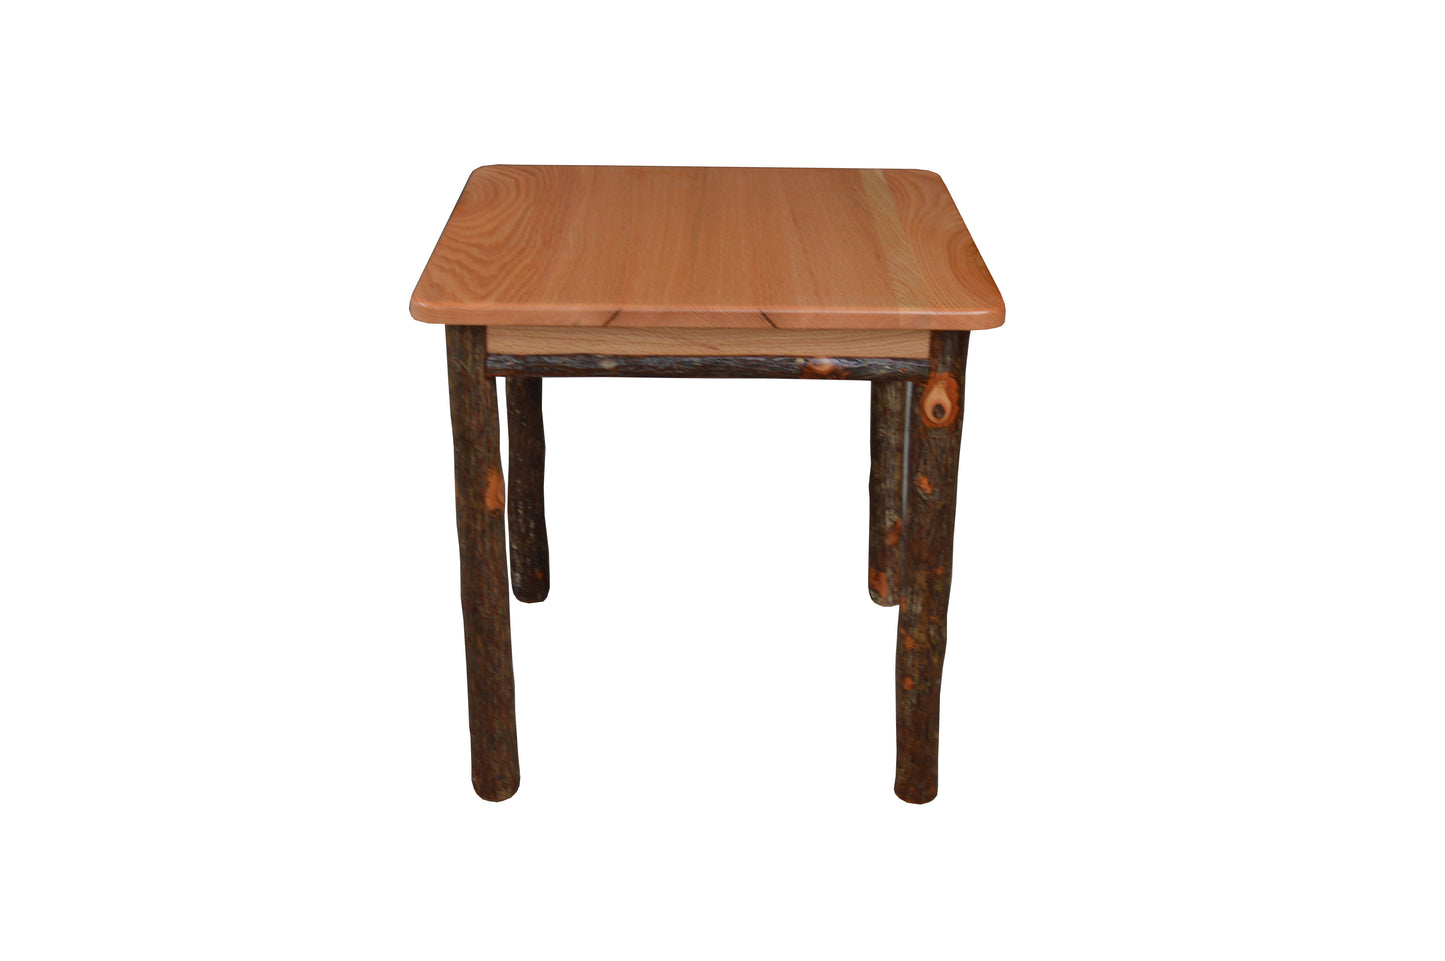 A&L Furniture Co. Hickory Solid Wood End Table - LEAD TIME TO SHIP 10 BUSINESS DAYS